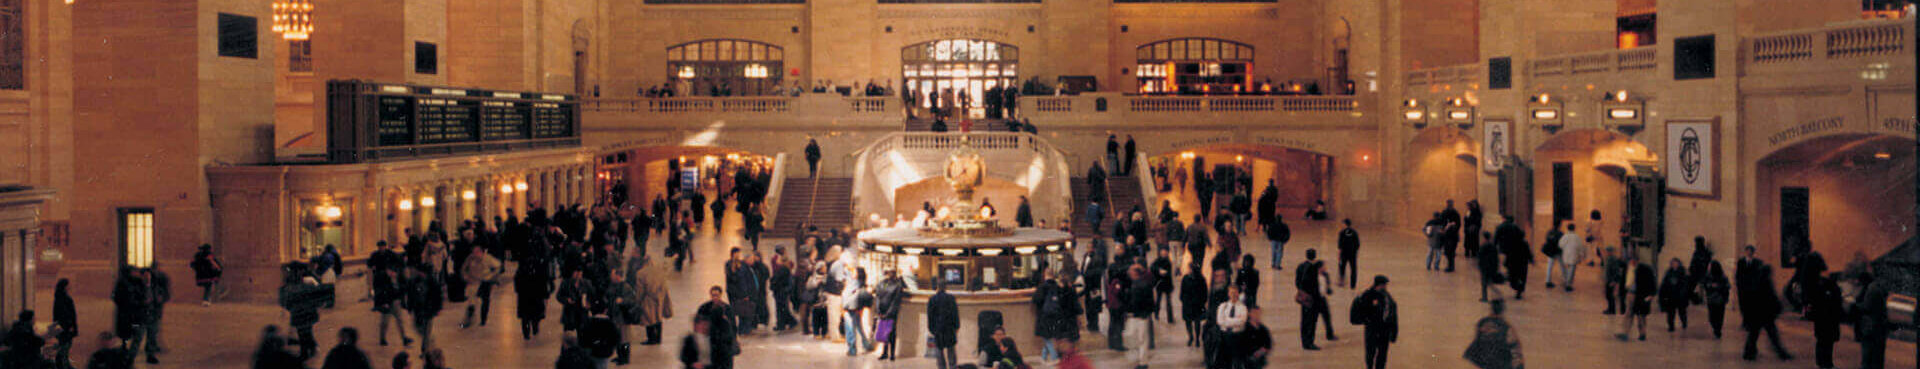 Owner of Grand Central Terminal in NYC becomes Macy's new landlord